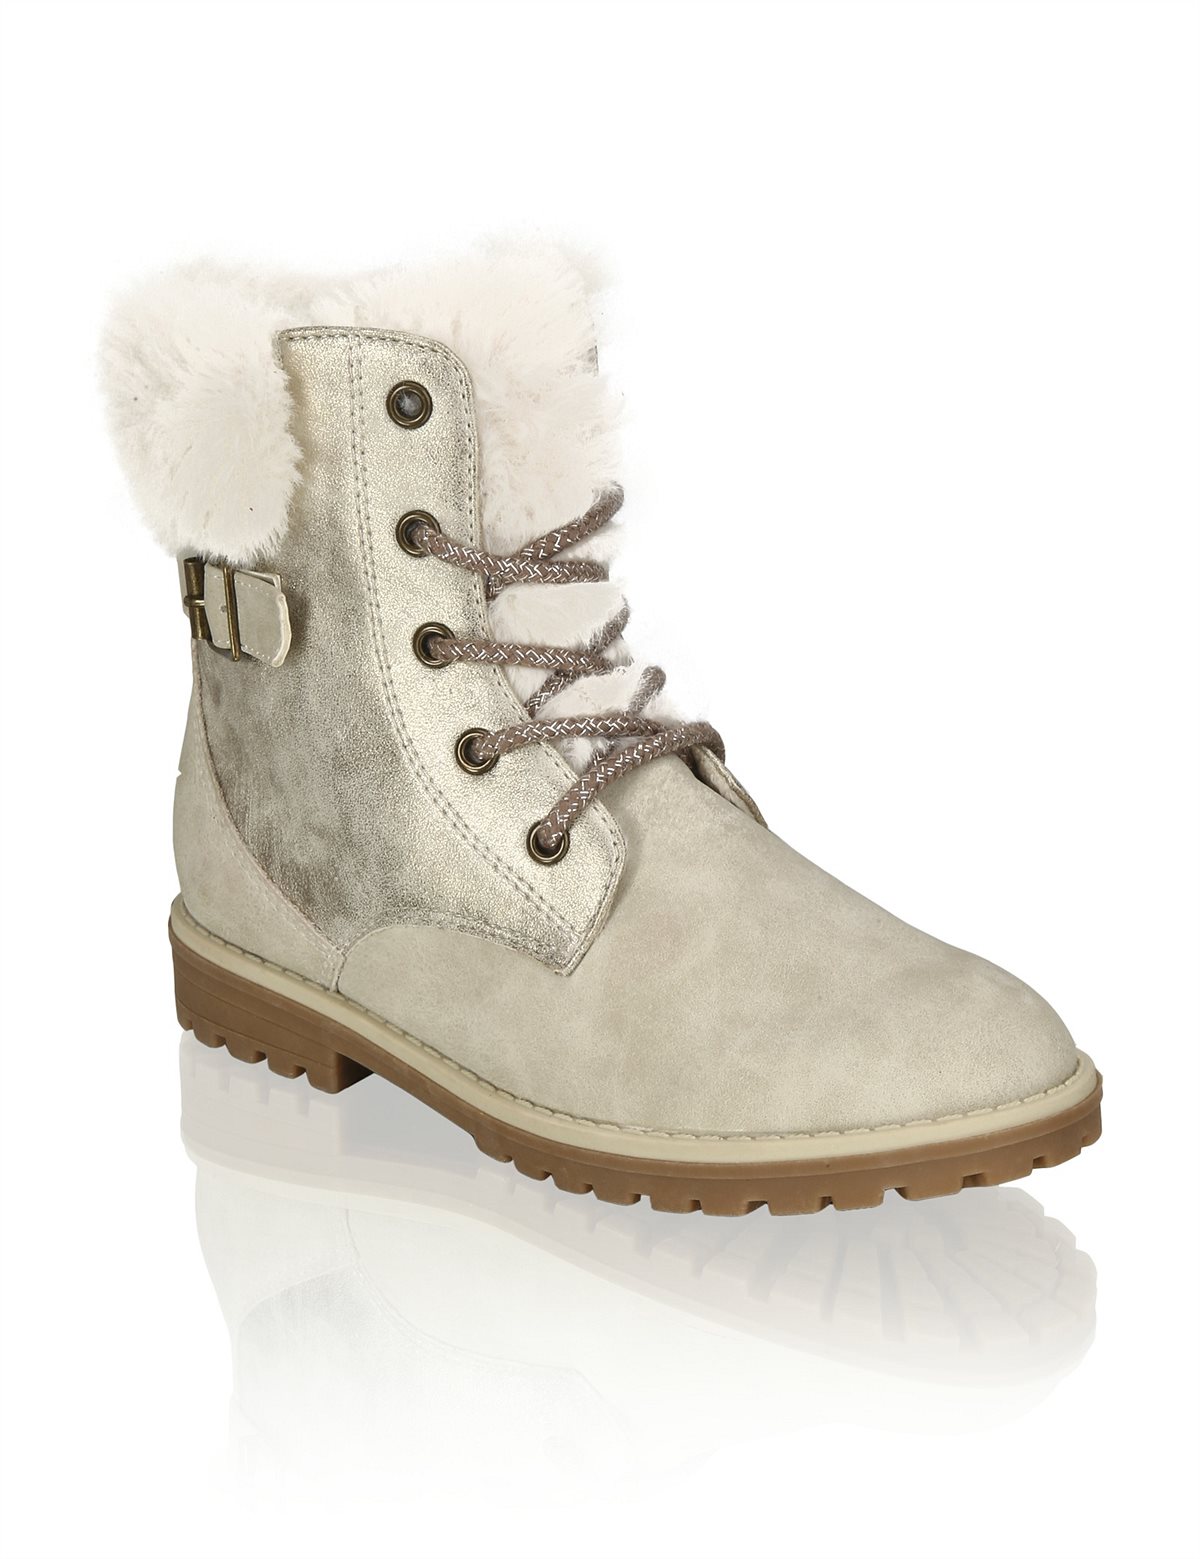 HUMANIC 13 Funky Girls Boots mit Warmfutter EUR 39,95 ab Mitte August 3623504725